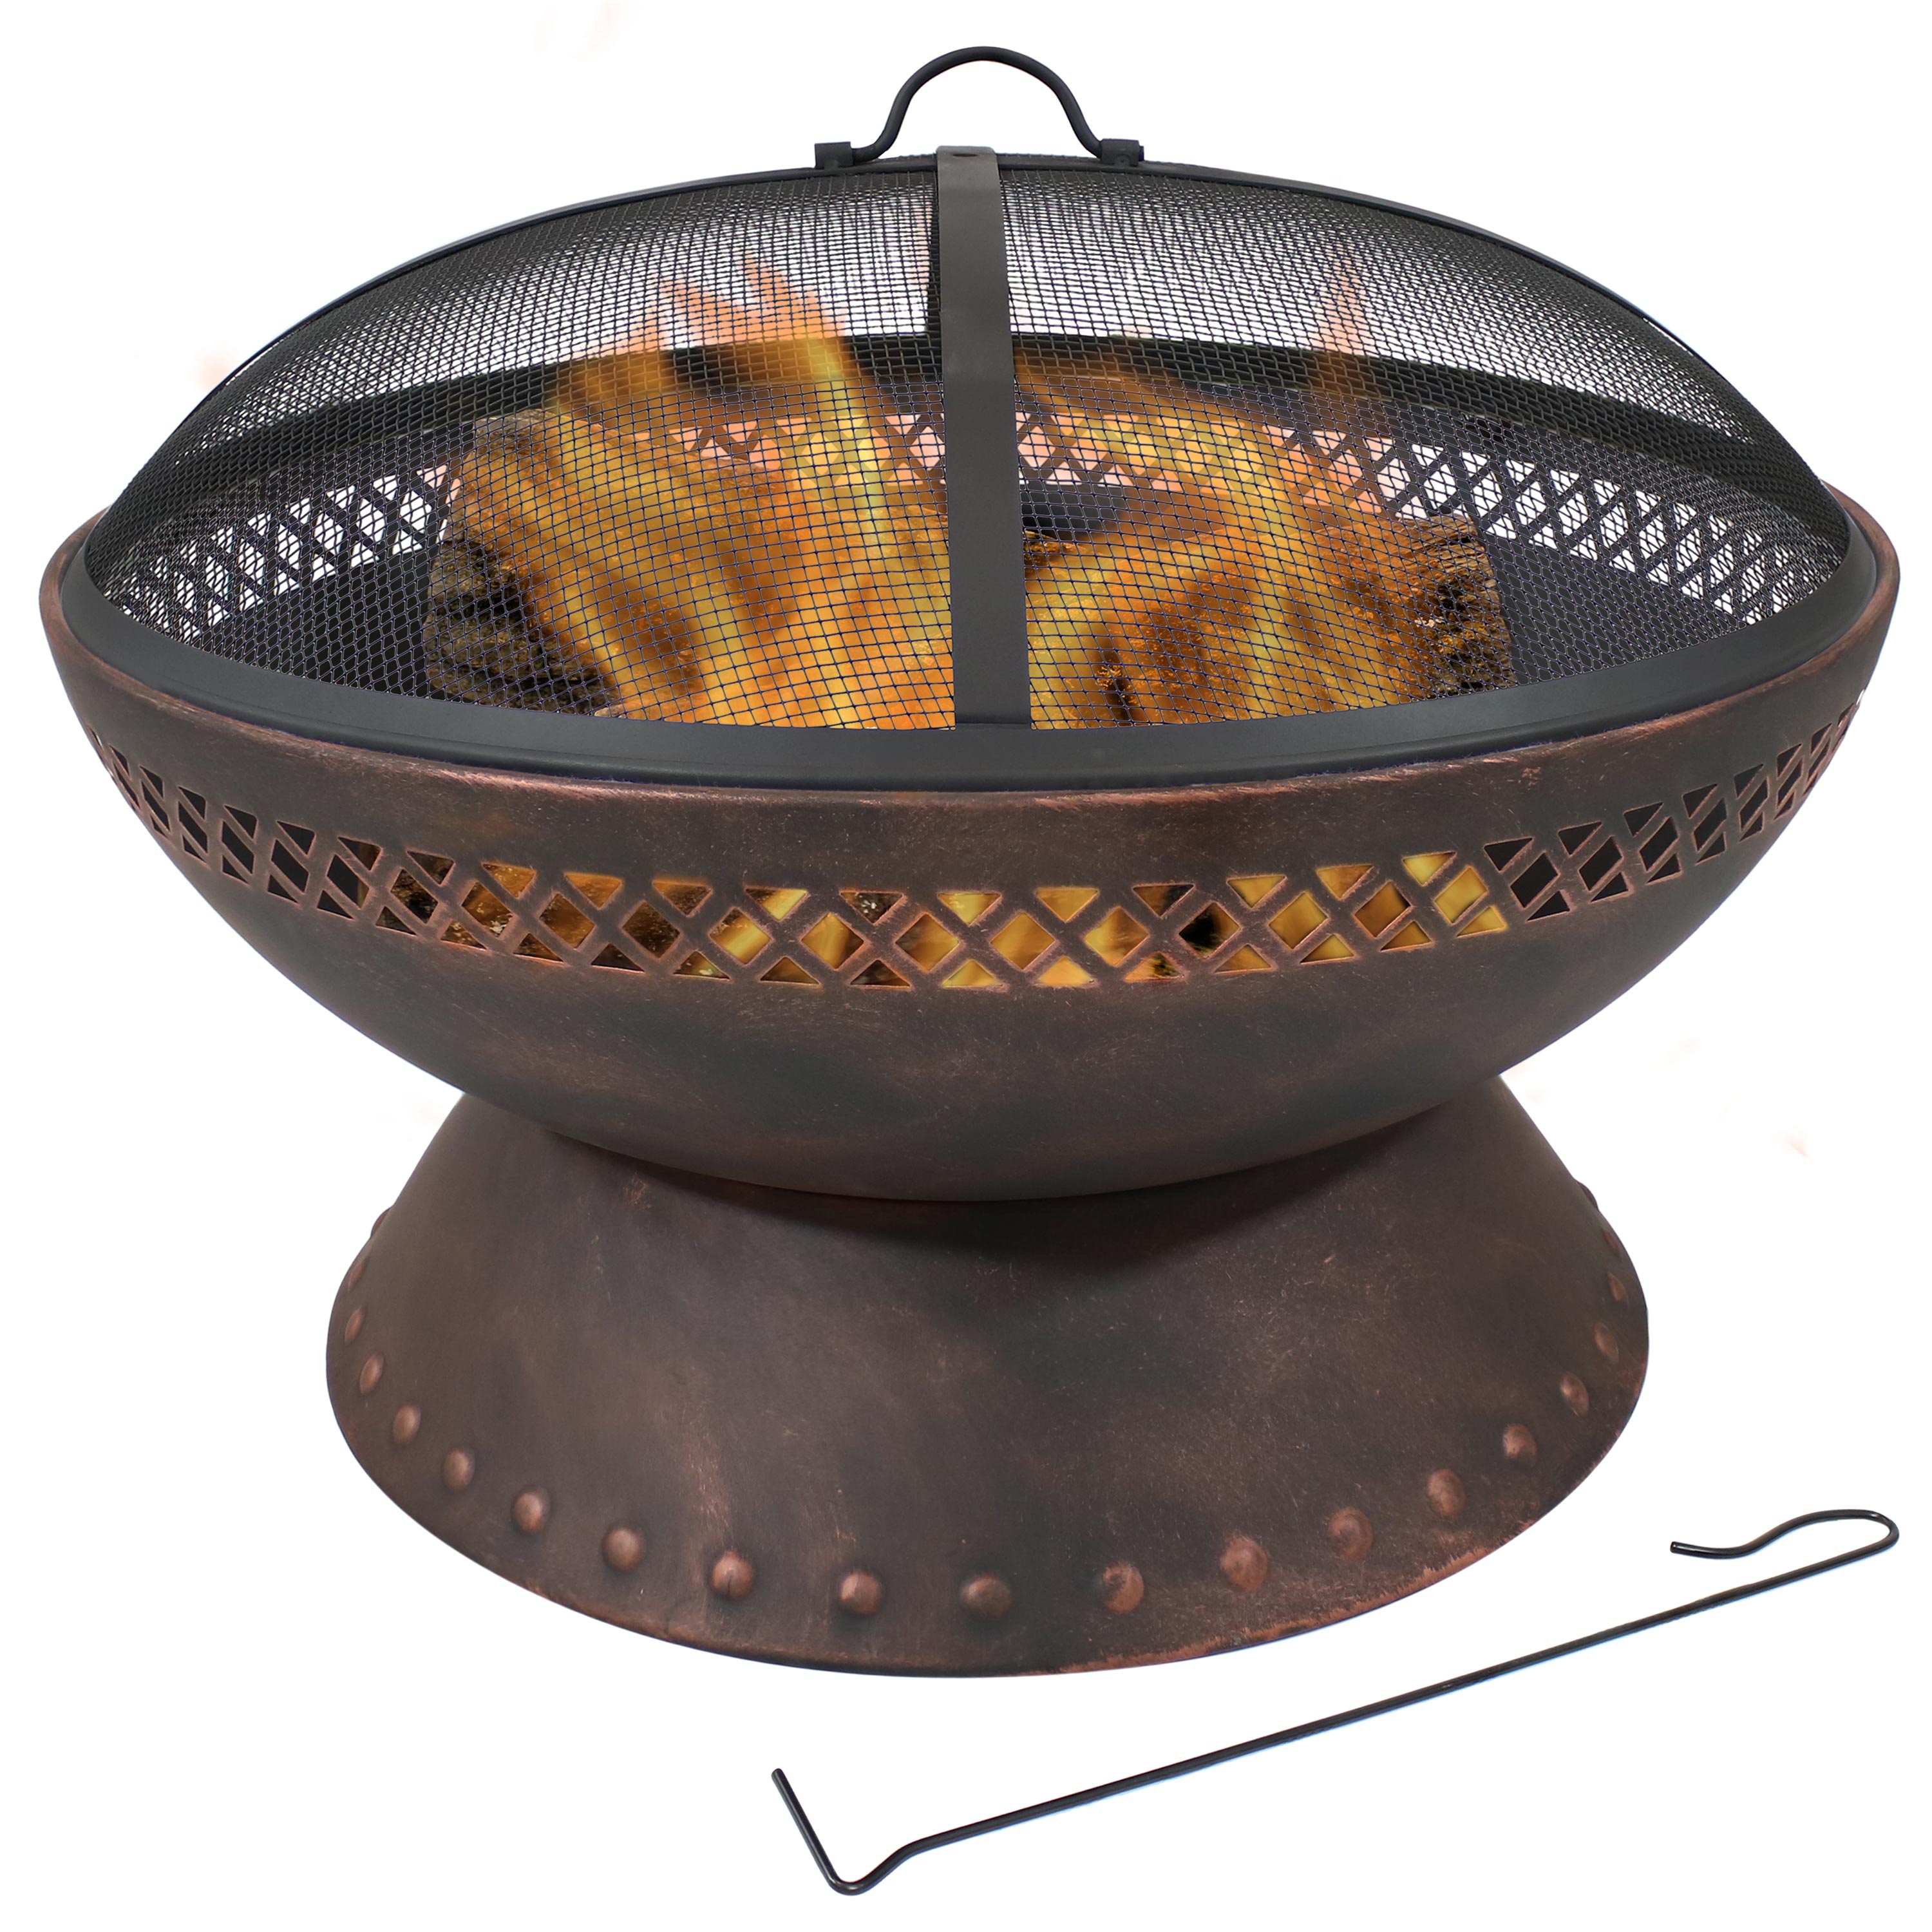 Sunnydaze Chalice Steel Fire Pit with Spark Screen - Copper Finish - 25-Inch